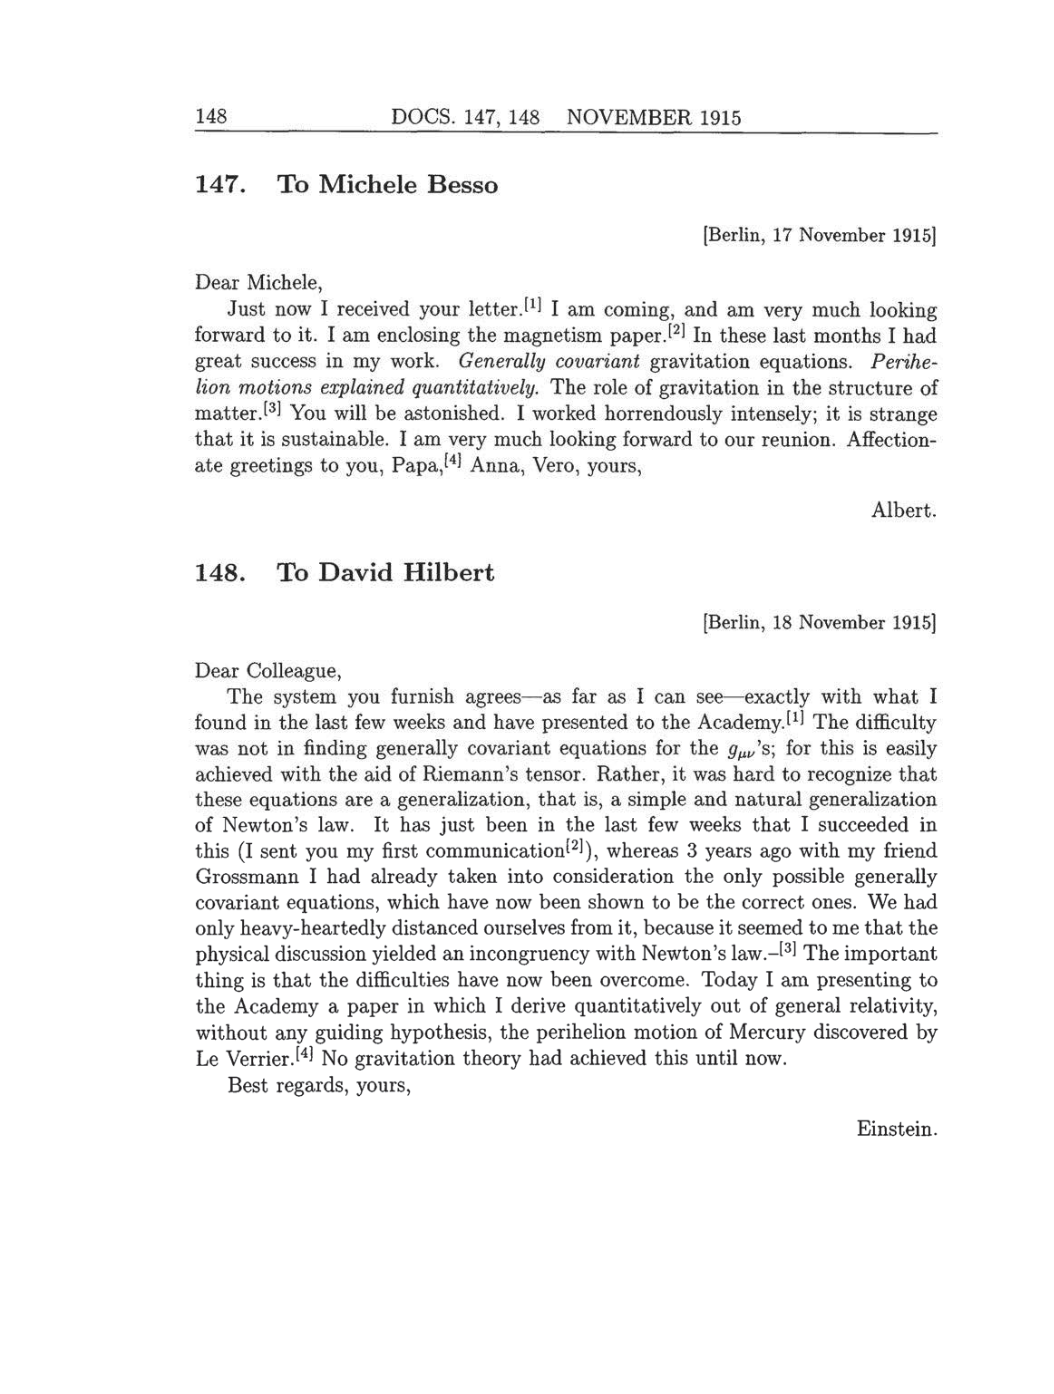 Volume 8: The Berlin Years: Correspondence, 1914-1918 (English translation supplement) page 148